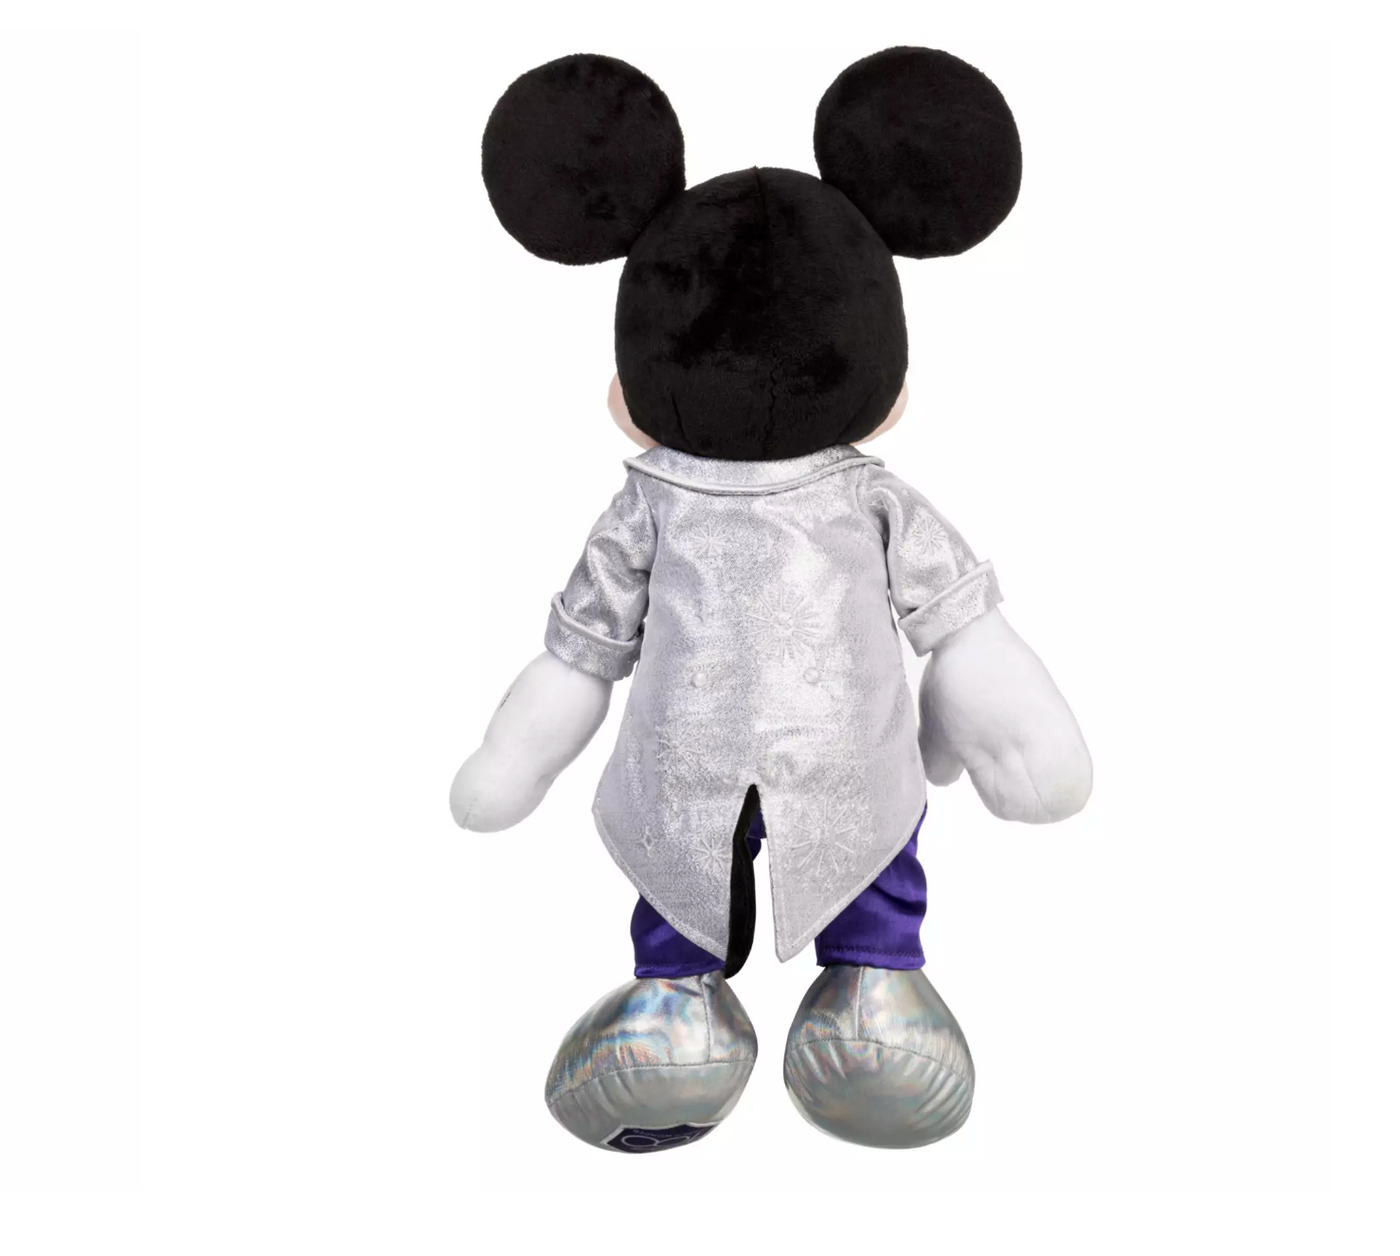 Disney Mickey Tuxedo Jacket Plush with Disney 100 Outfit New with Tag